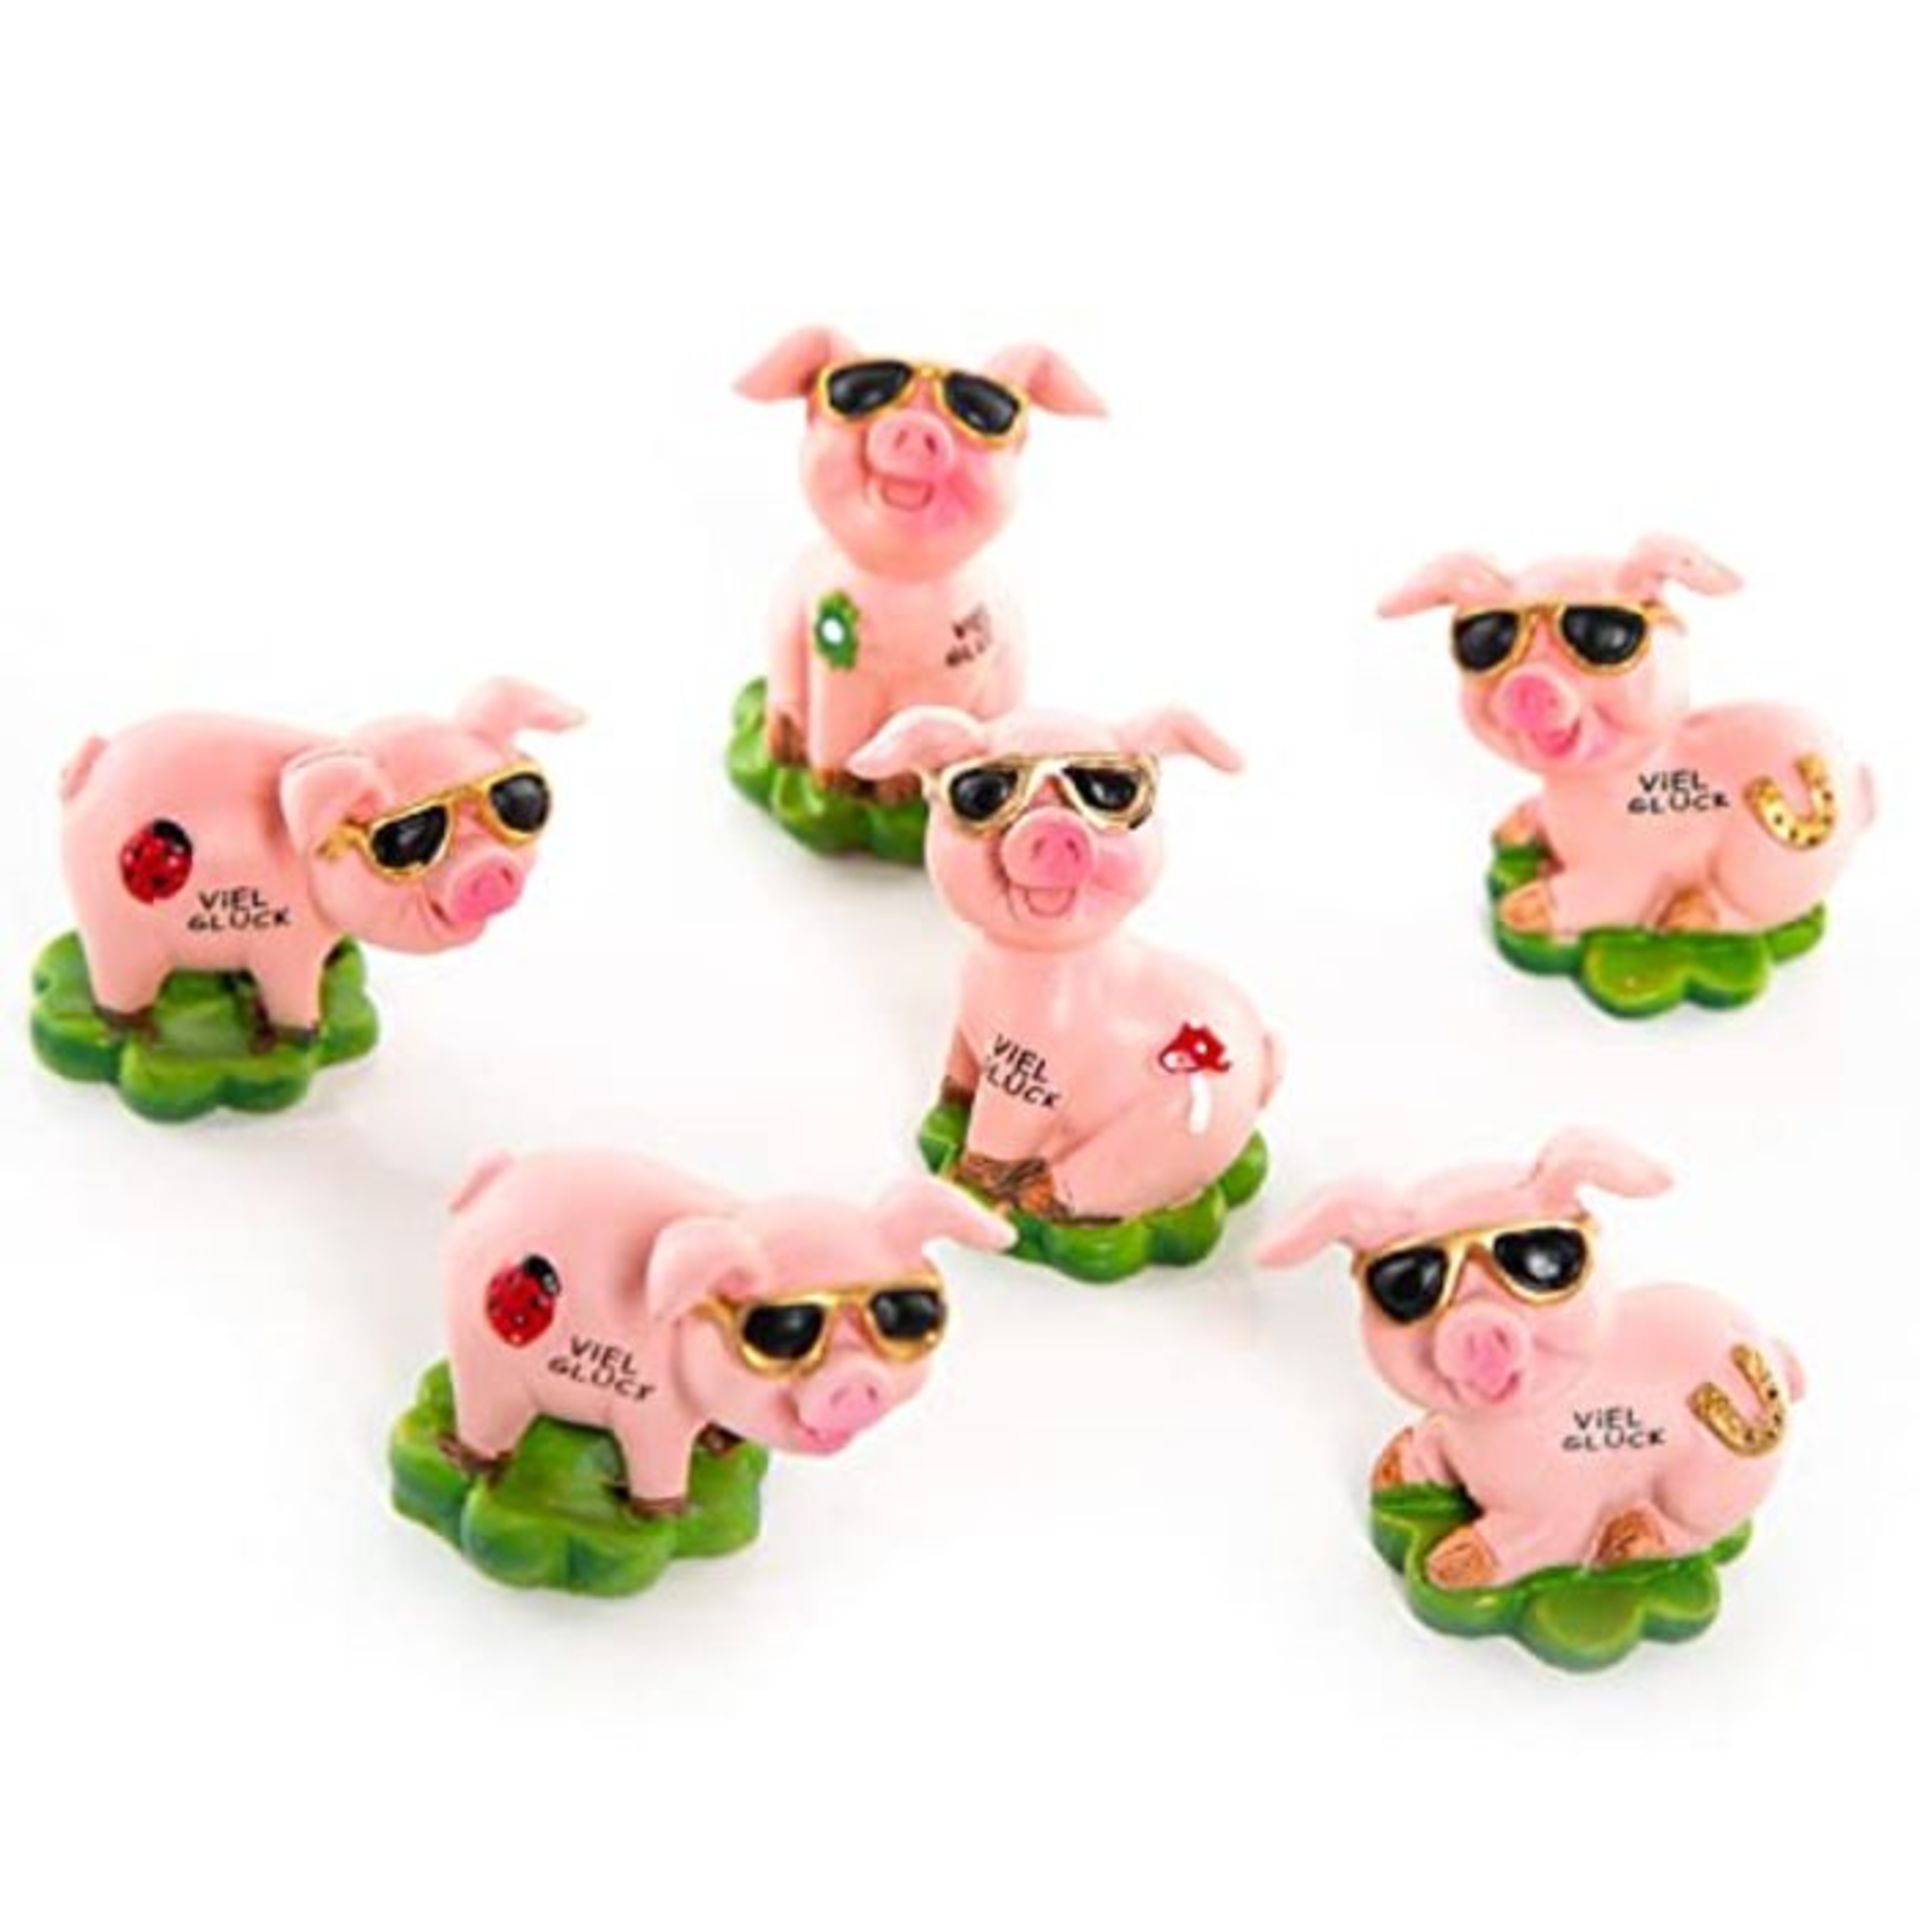 Logbuch-Verlag 6 Small Lucky Pigs on Clover Leaf Pink Green with Text "Viel Glück" (G